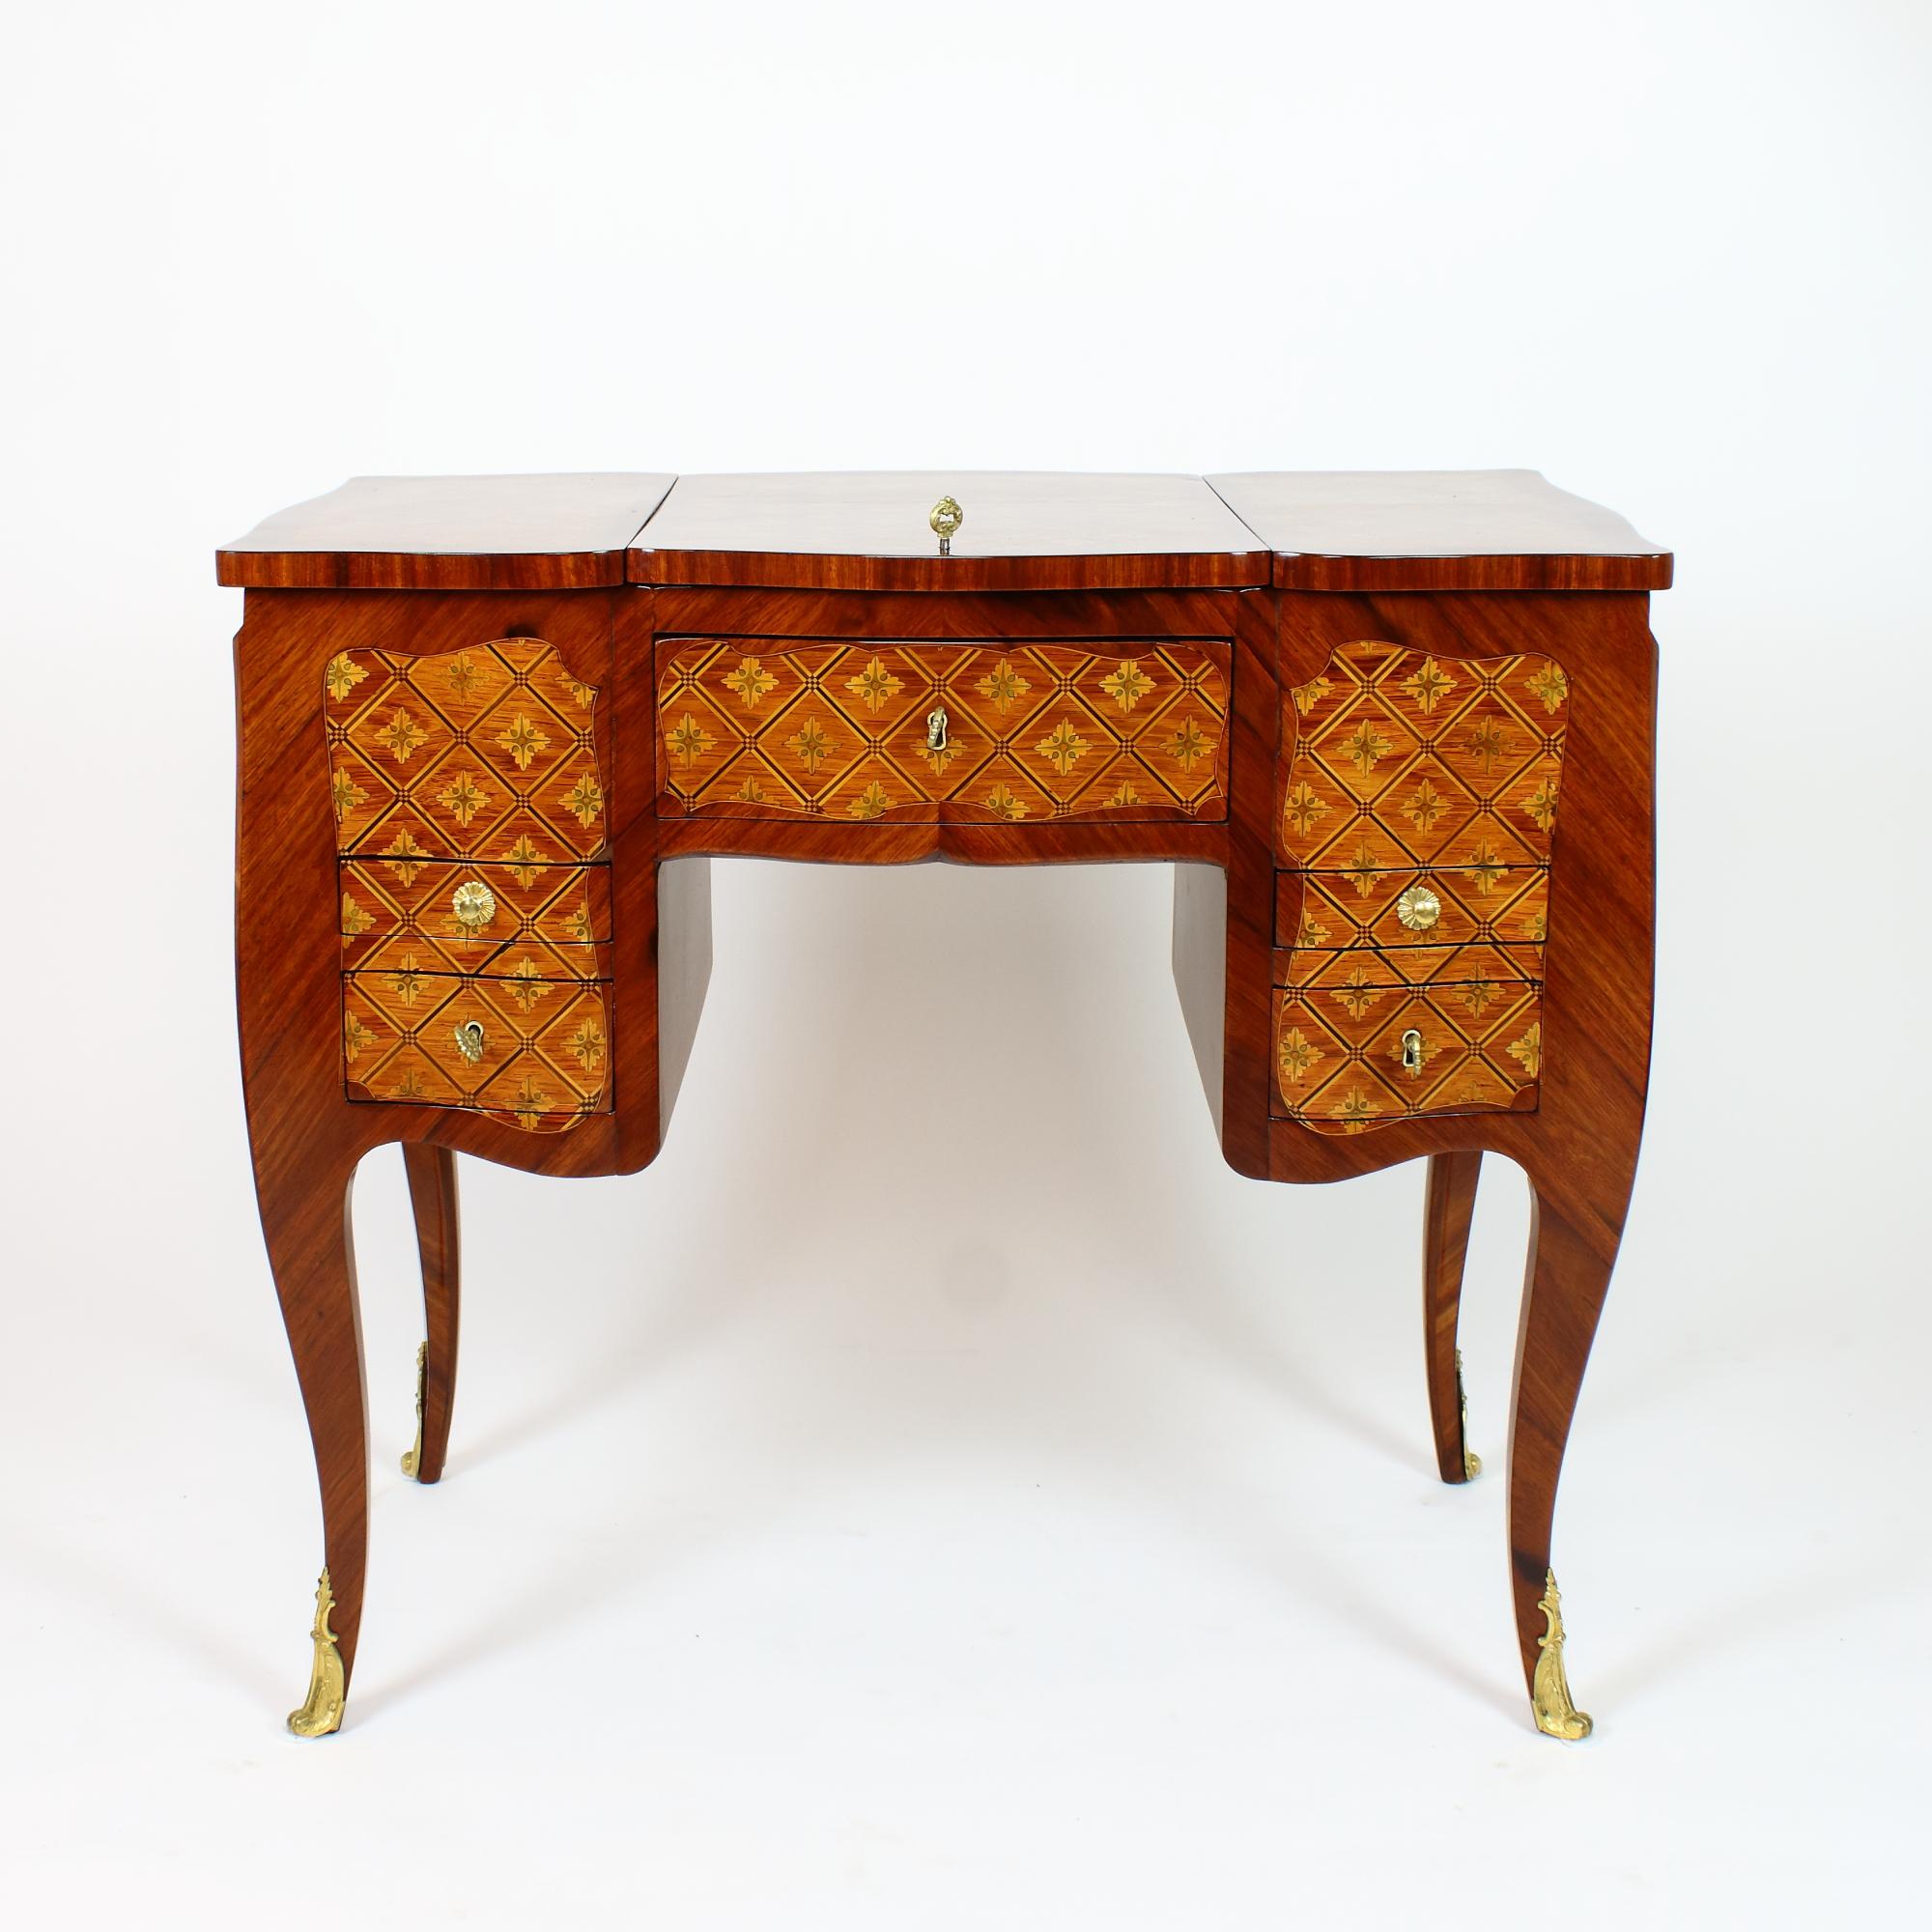 Mirror French Louis XV Marquetry Dressing Table Perruquiere, Manner of Pierre Roussel